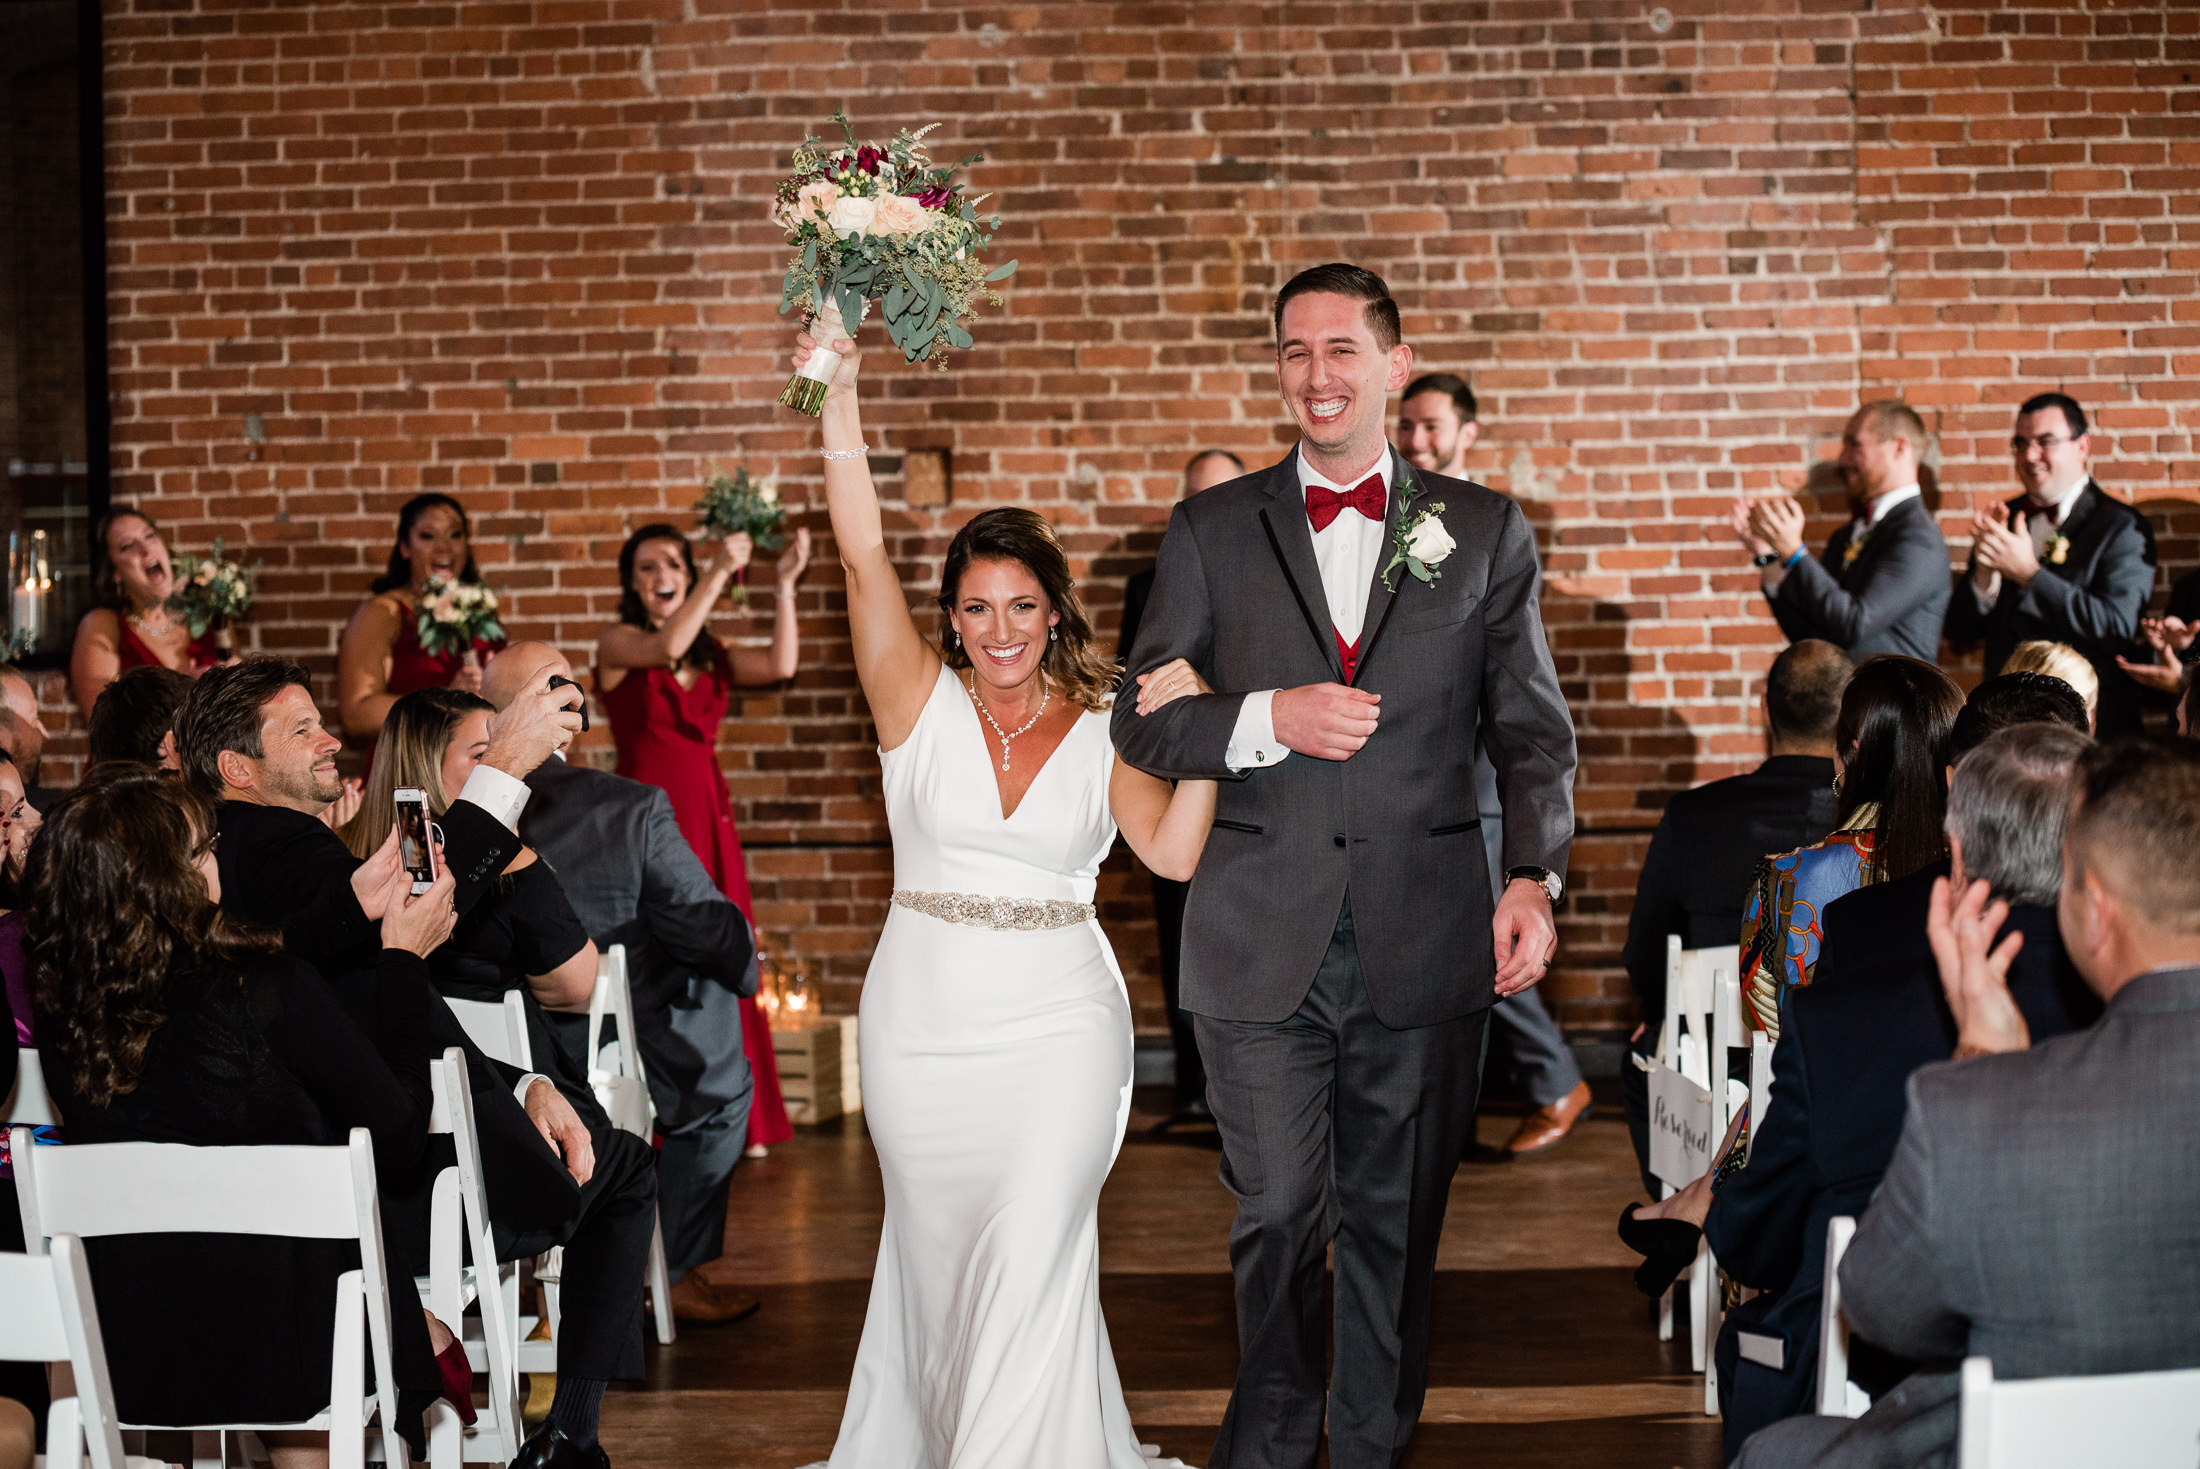 Industrial wedding ceremony at charles river museum in waltham ma